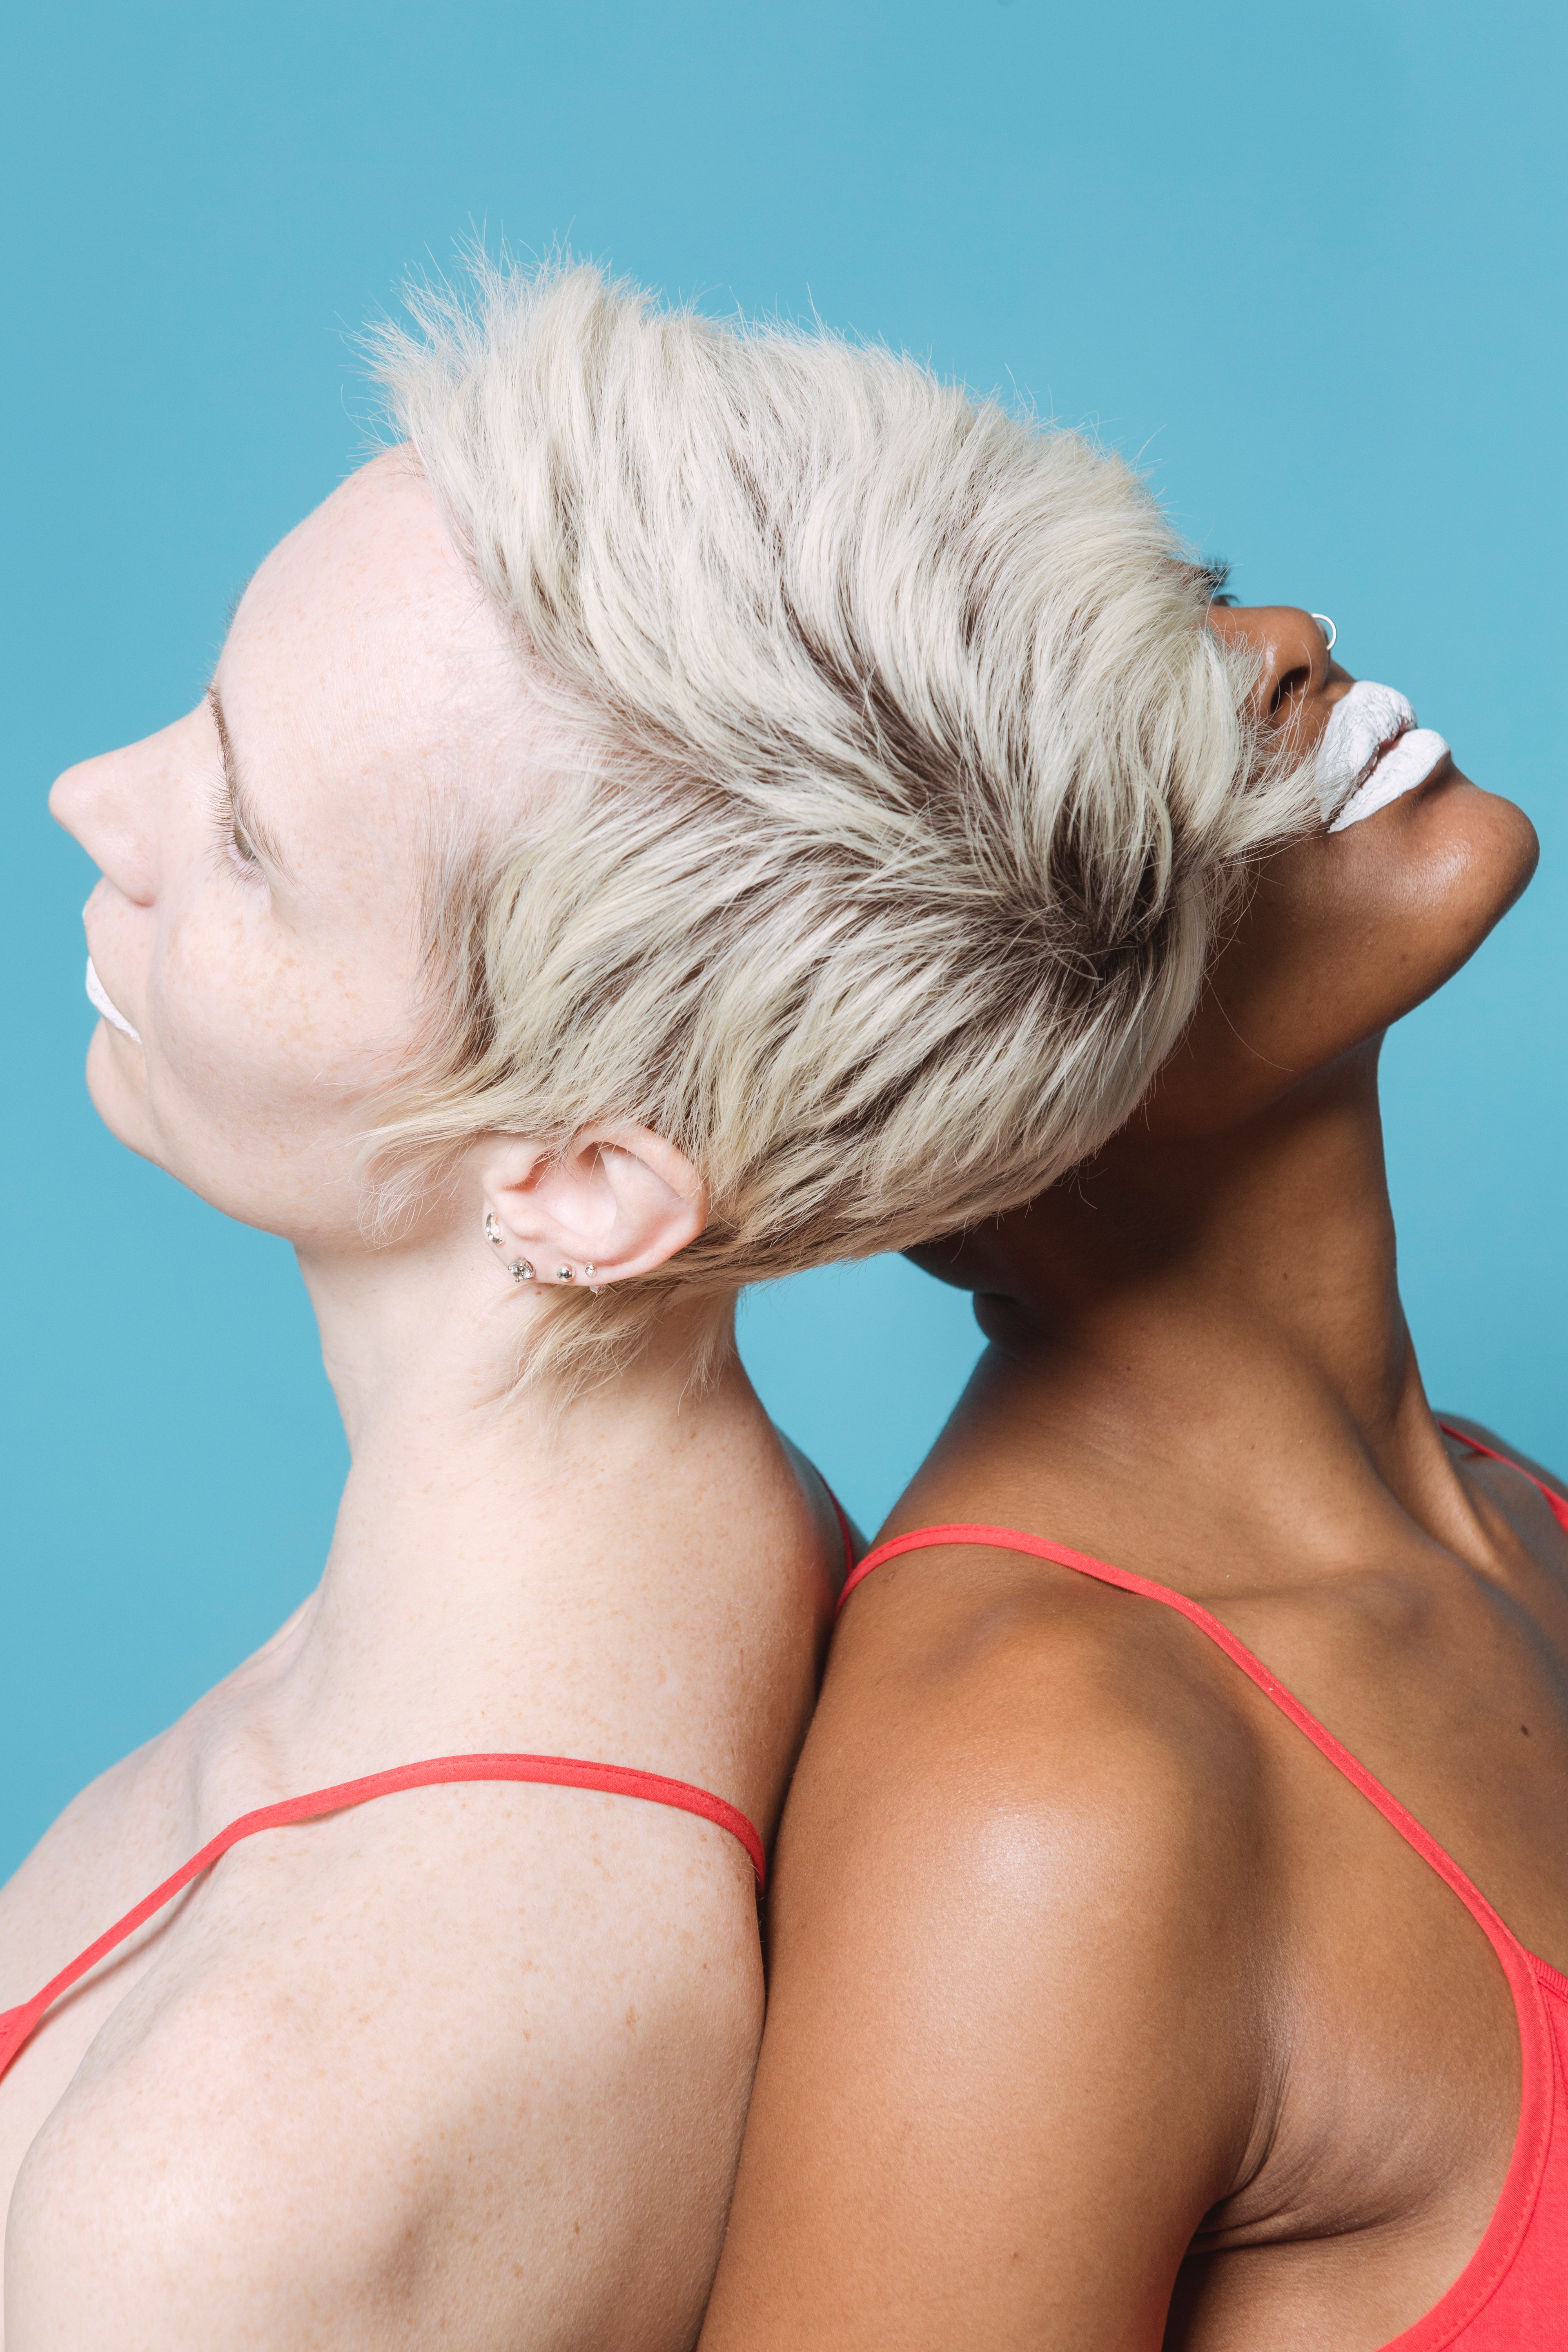 Two woman leaning backward on one another.│ Source: Pexels